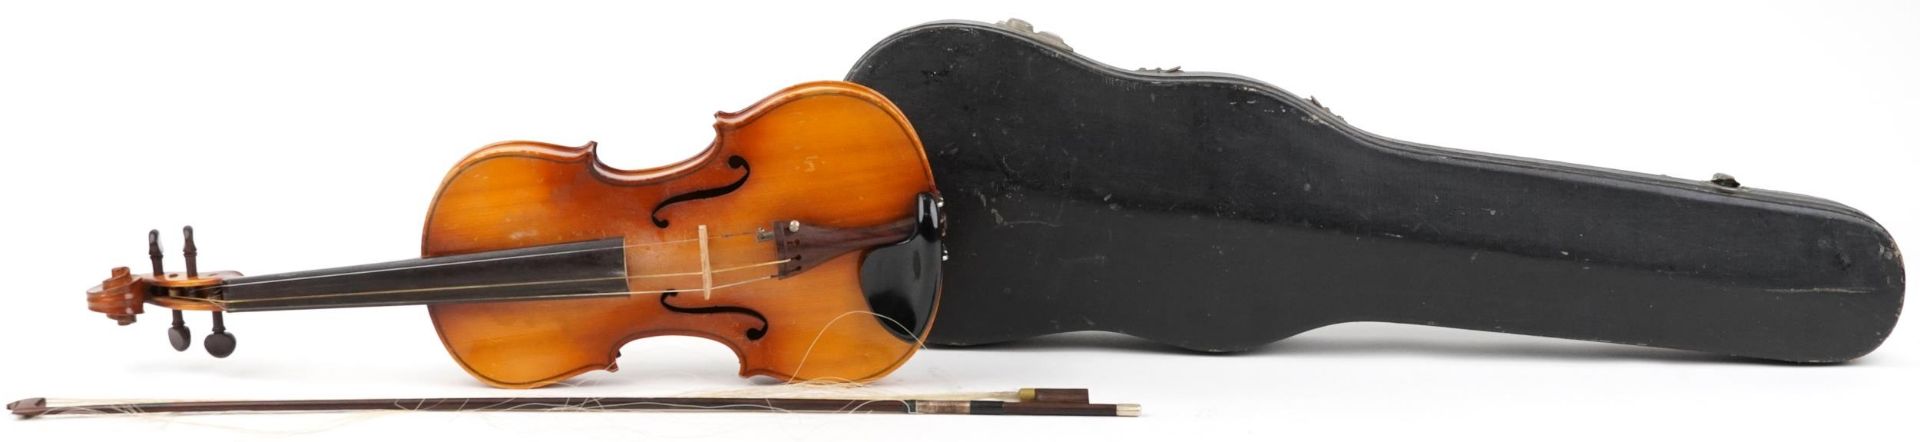 Blessing wooden violin with one piece back and rosewood bow housed in a protective case, the - Bild 3 aus 5